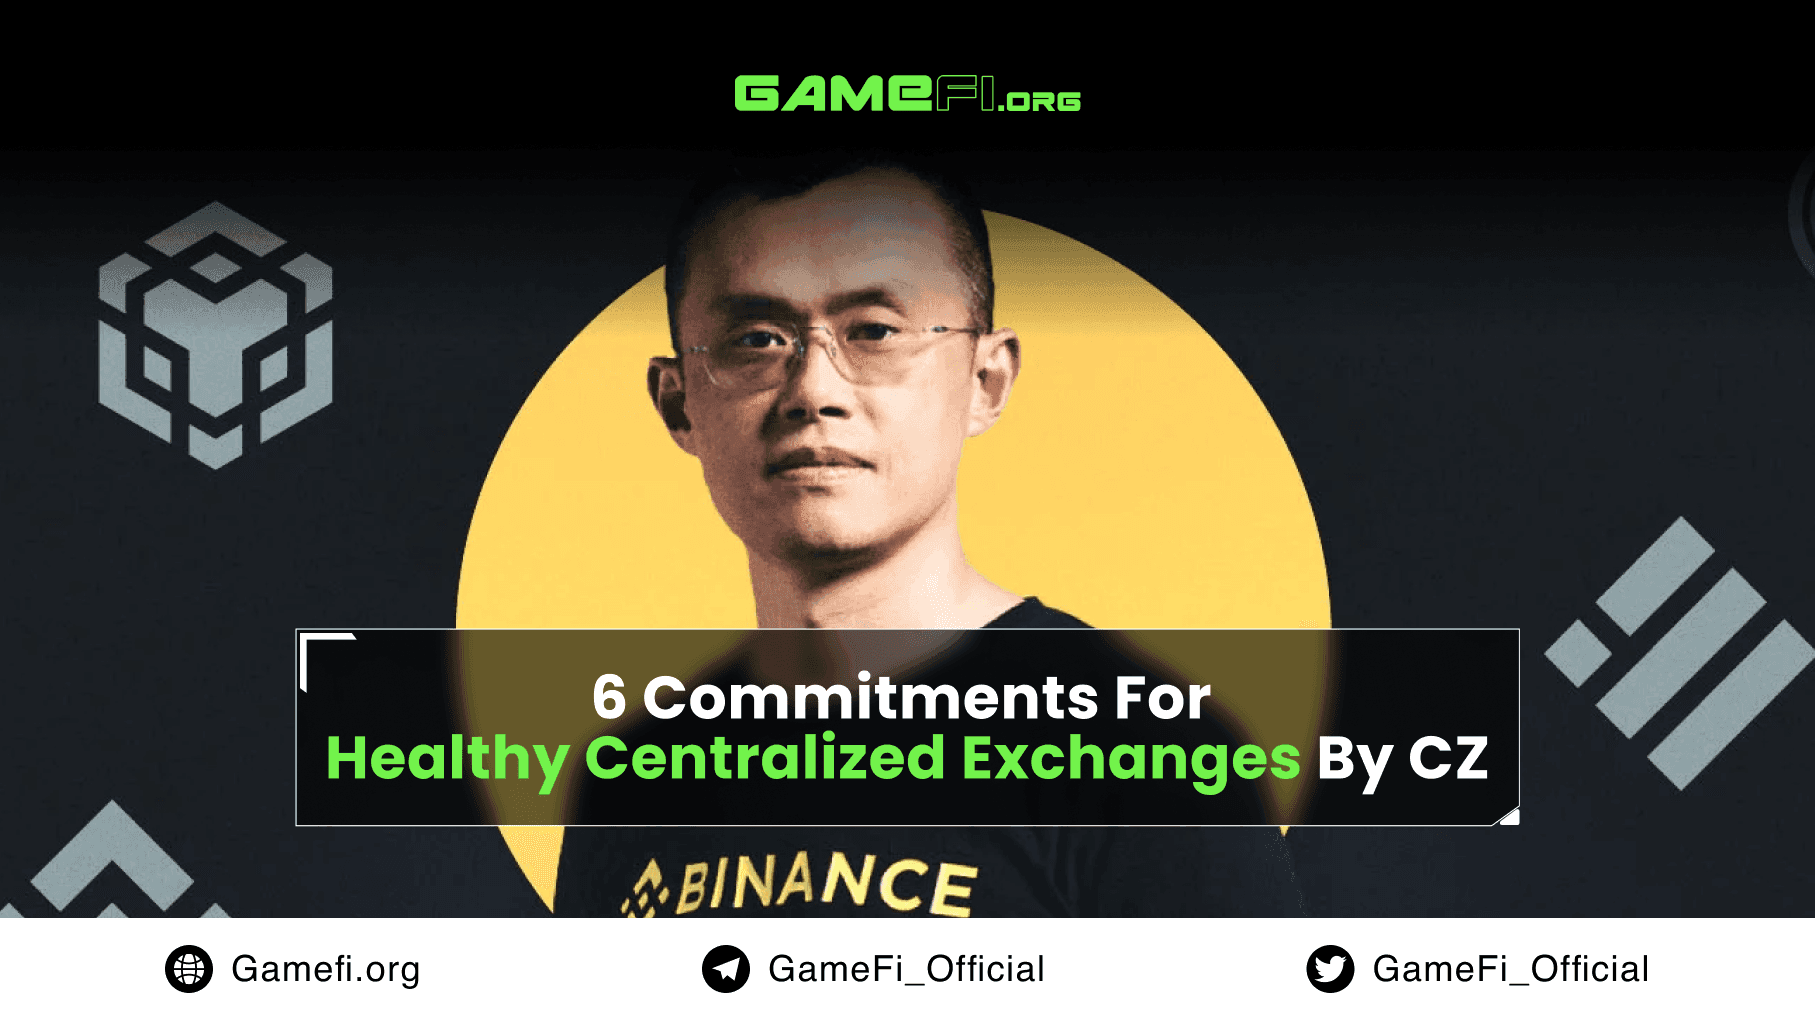 6 Commitments For Healthy Centralized Exchanges Advised Binance's CEO CZ